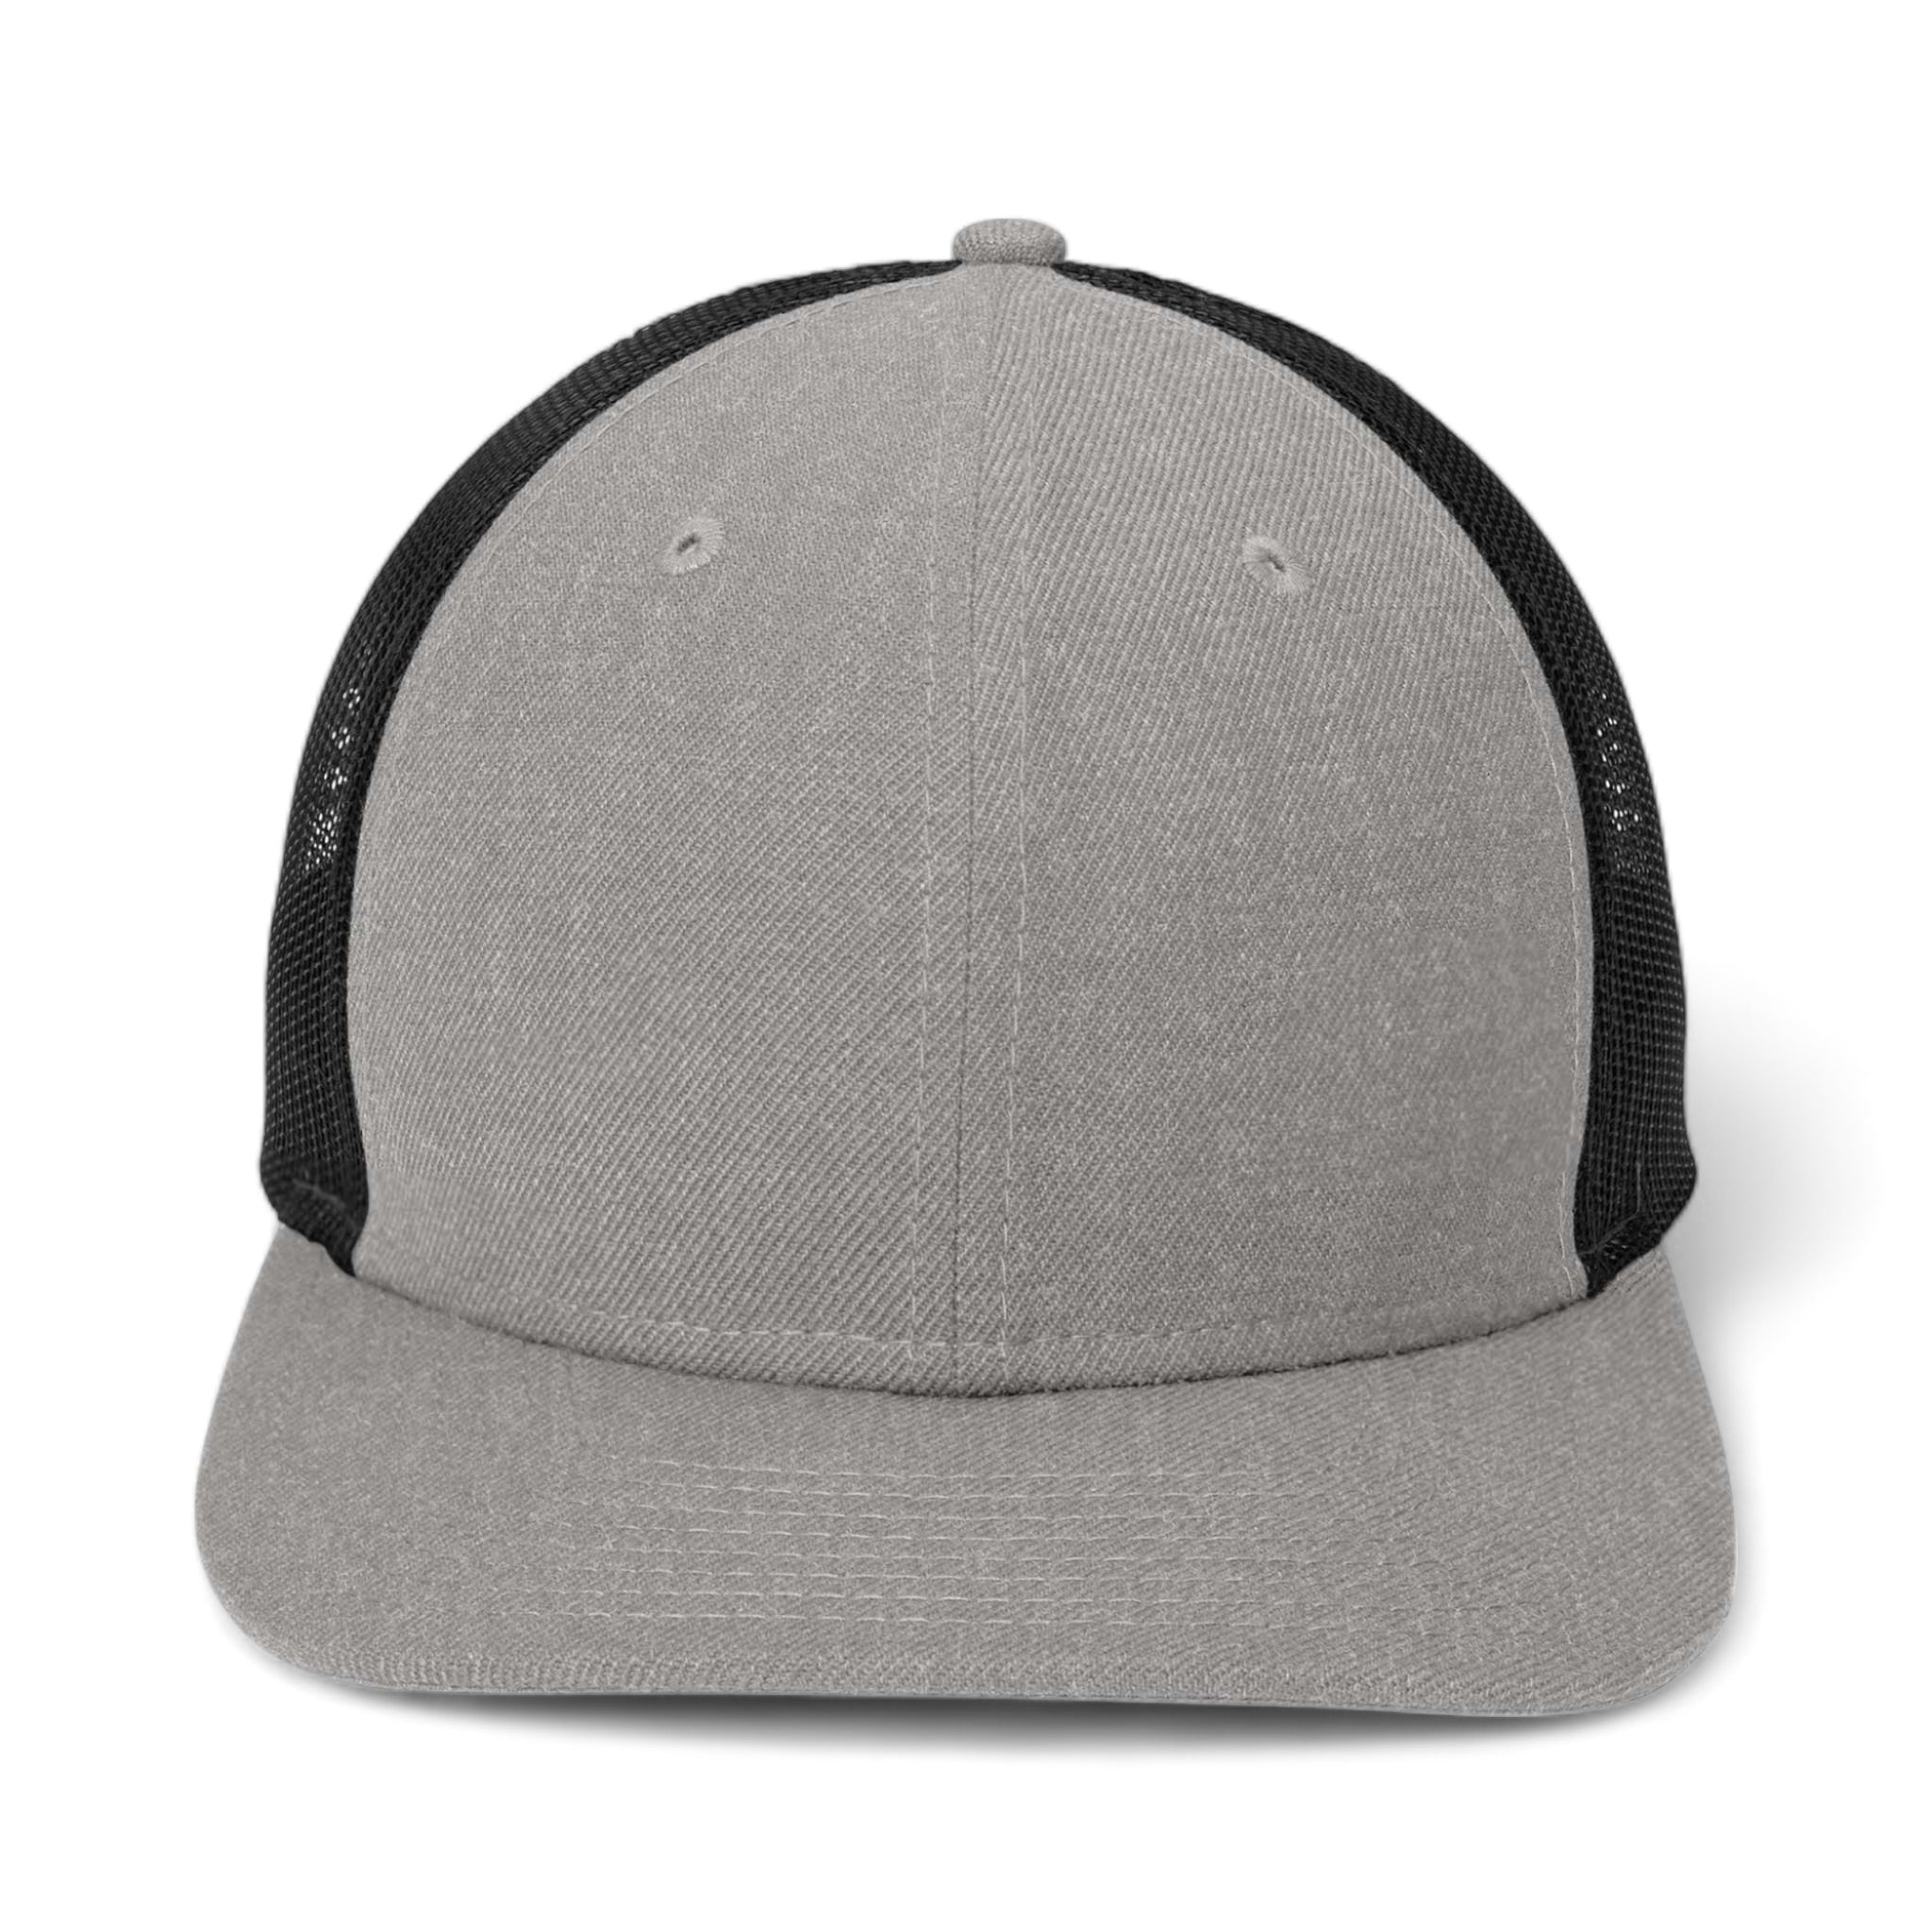 Front view of New Era NE207 custom hat in heather grey and black